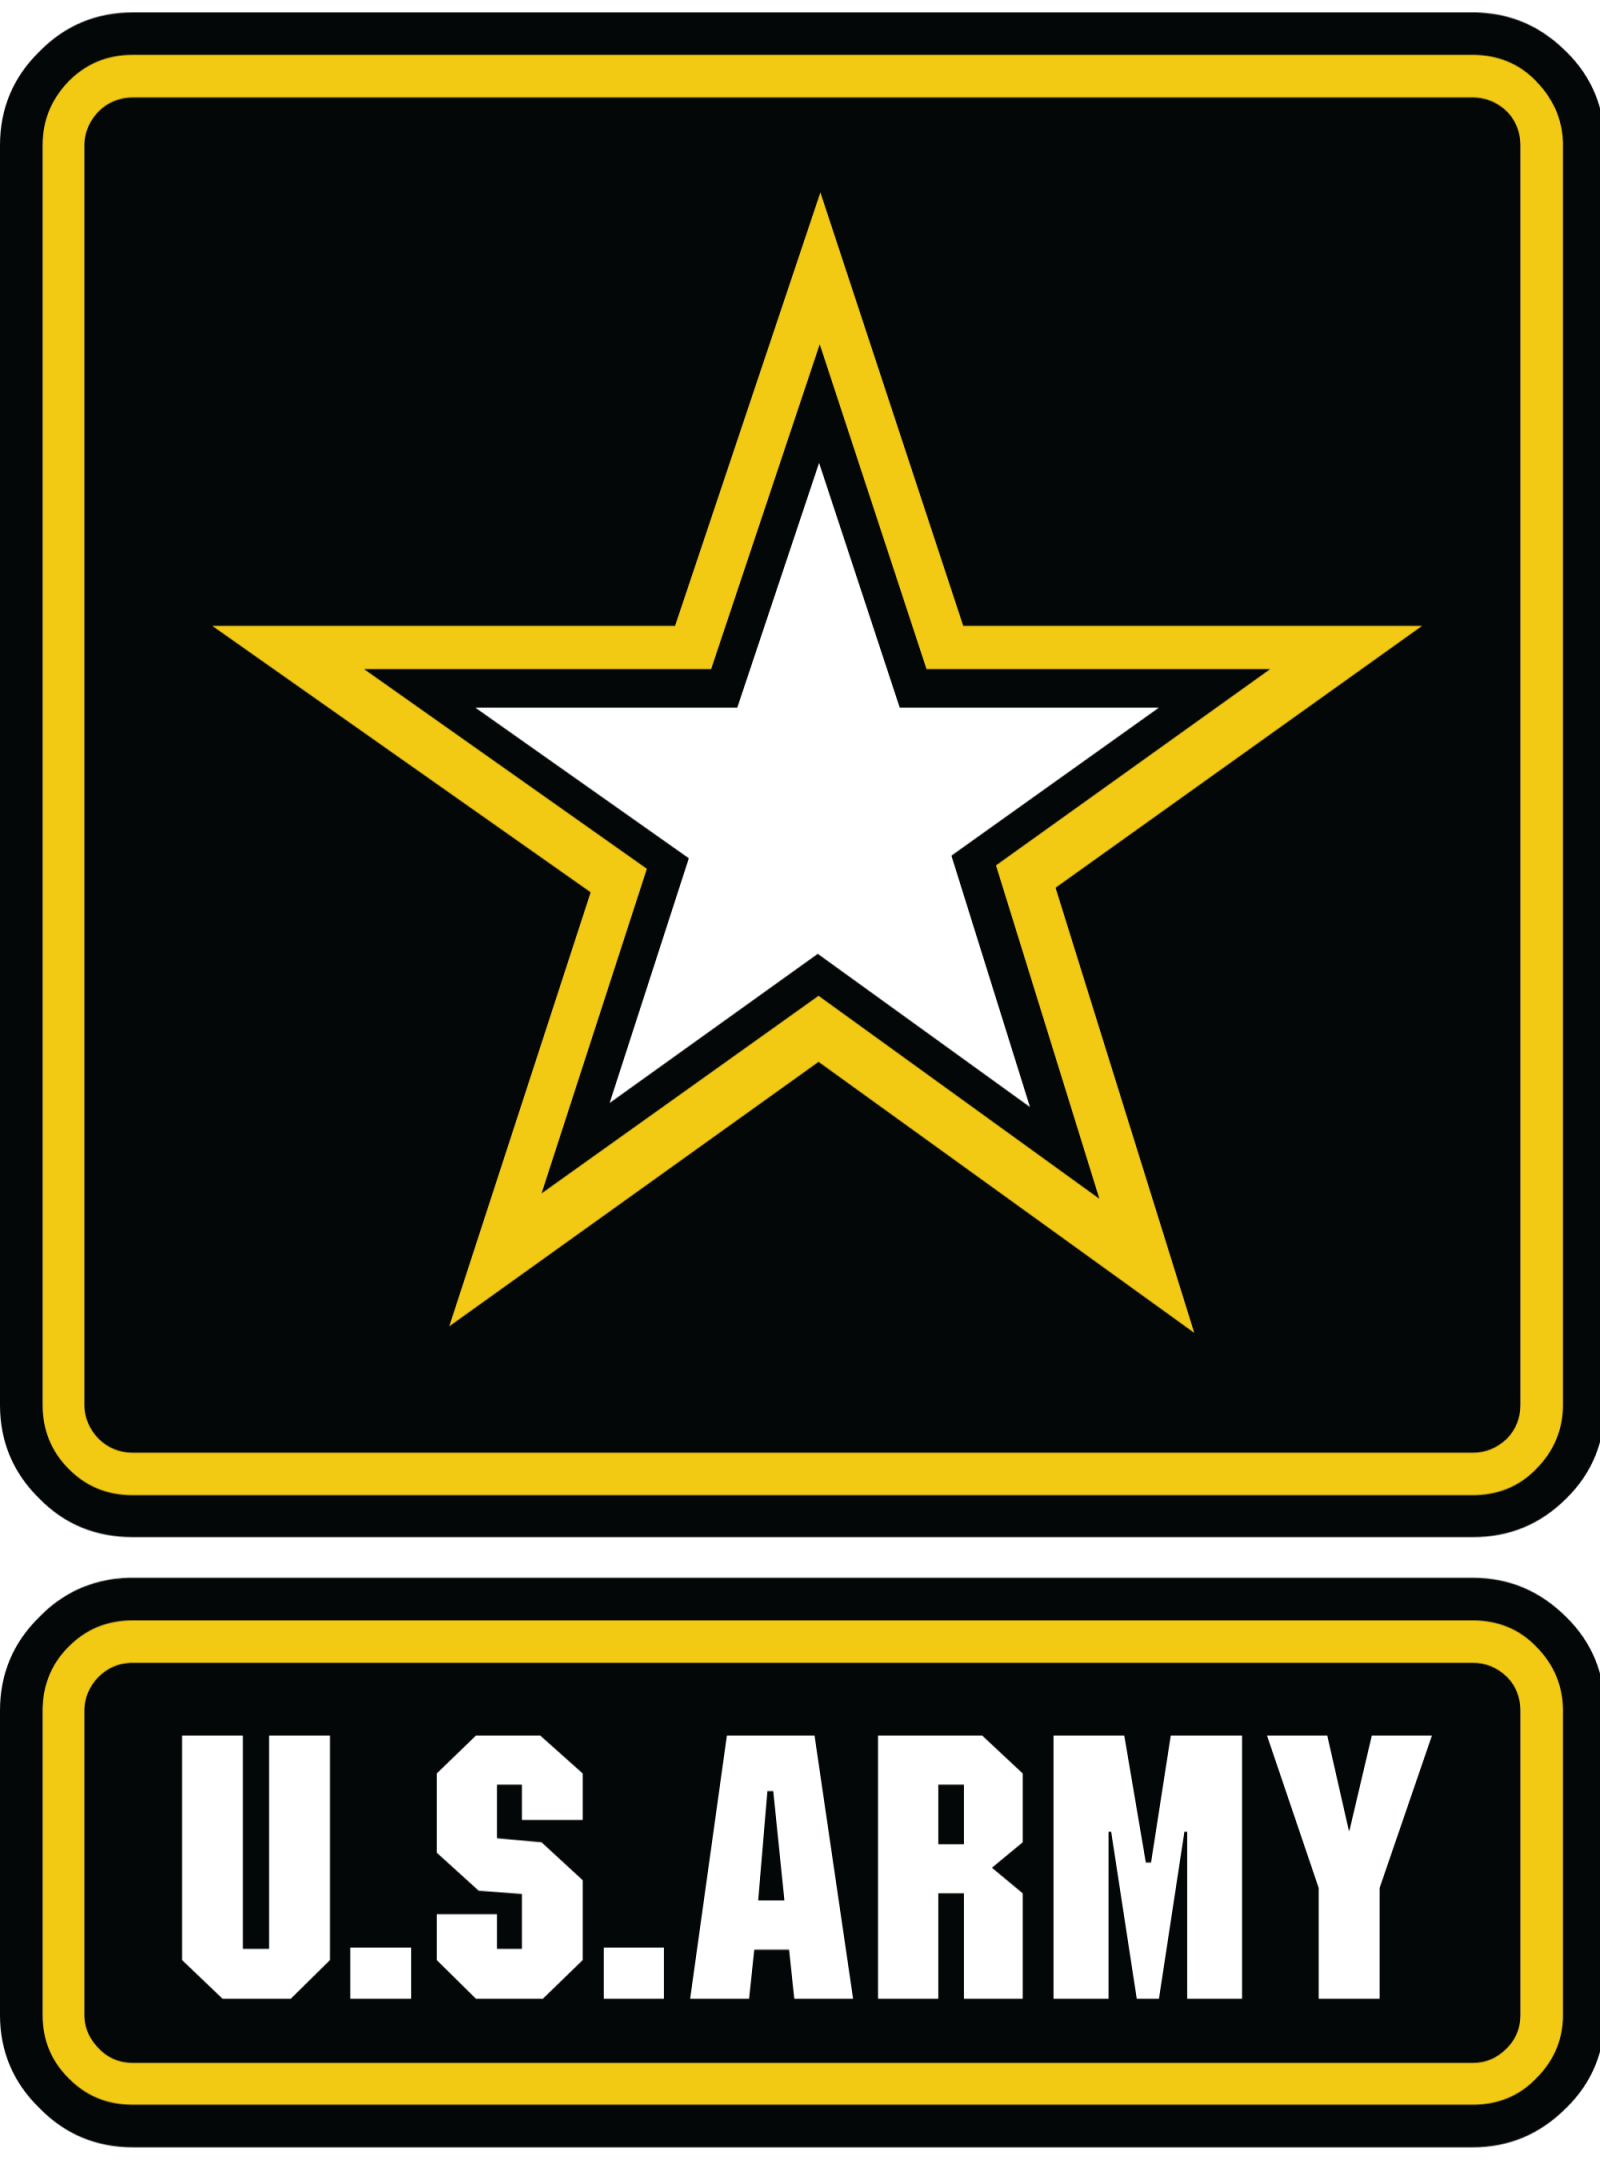 kisspng-united-states-army-military-5adccca735d0c0.2245397915244197512204.png